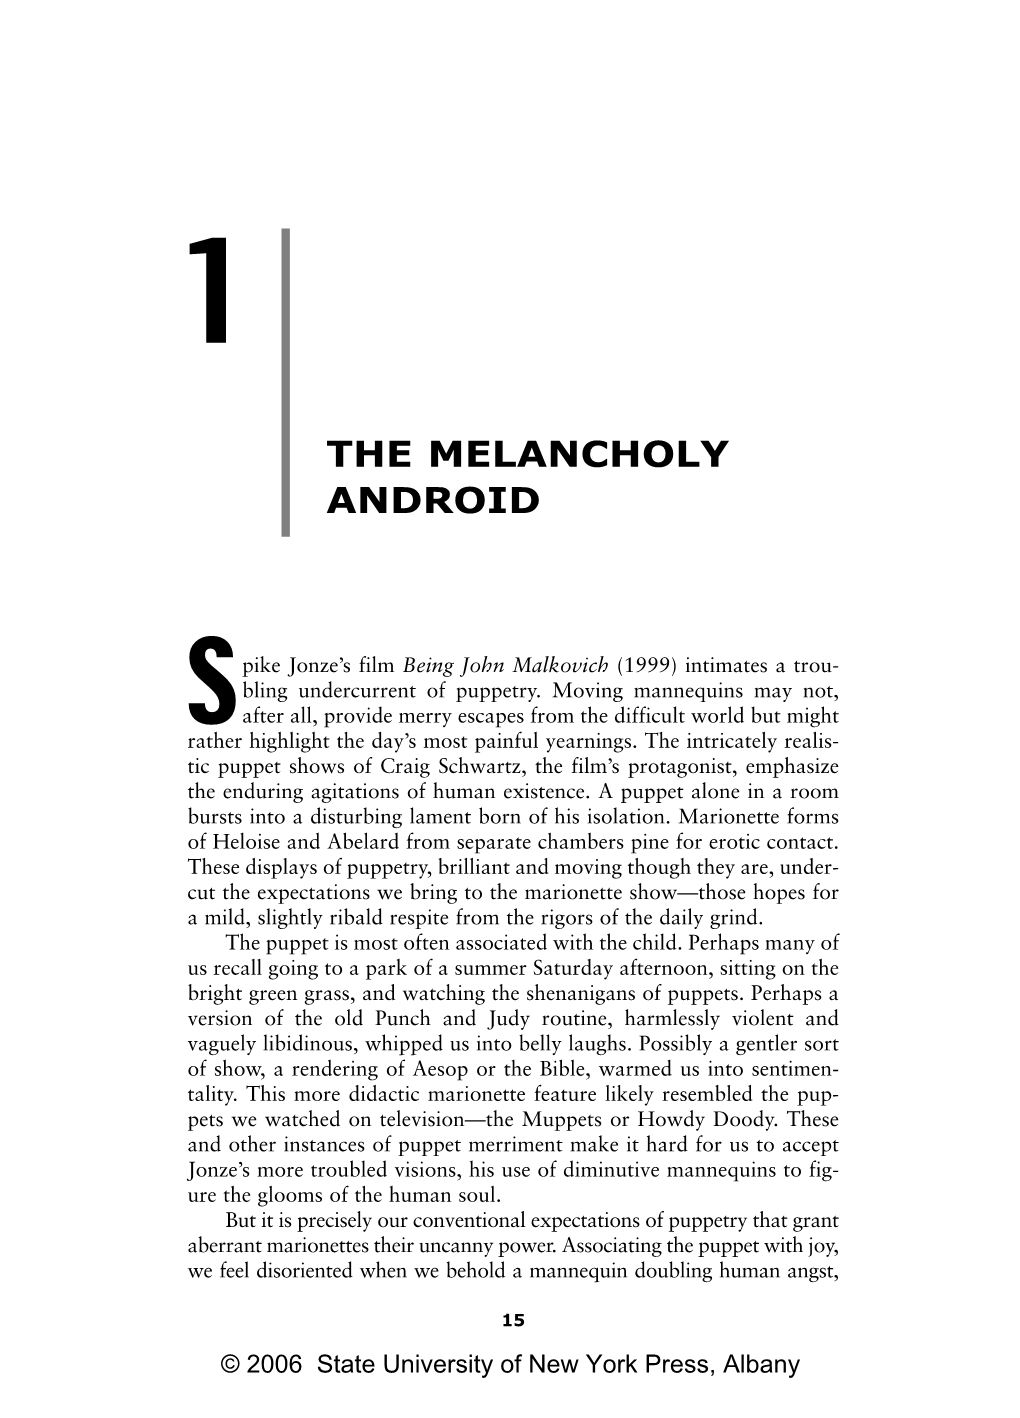 The Melancholy Android